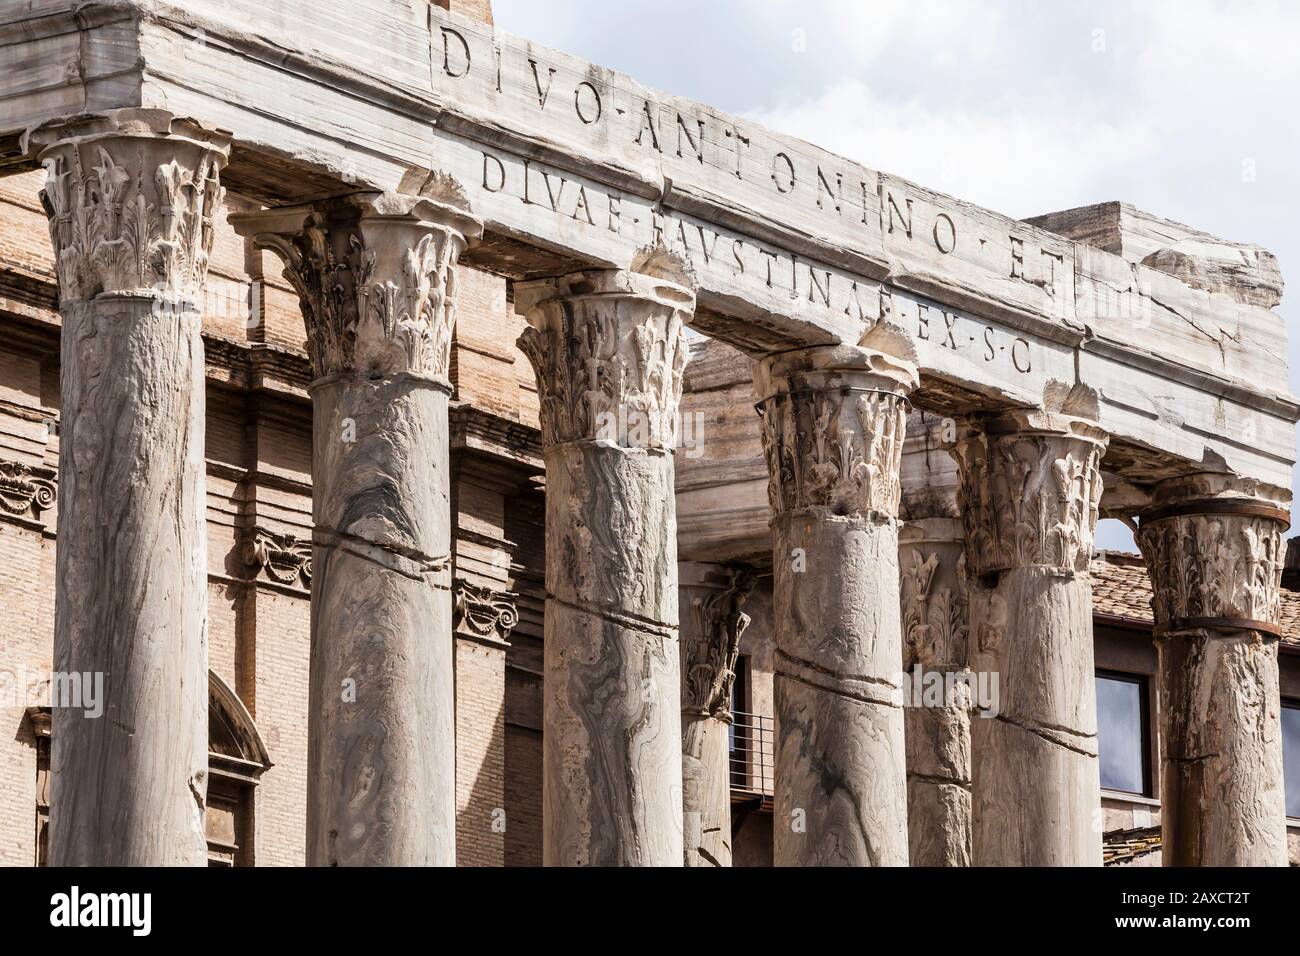 Temple of Antoninus and Faustina in the Roman Forum, Rome, Italy. Stock Photo